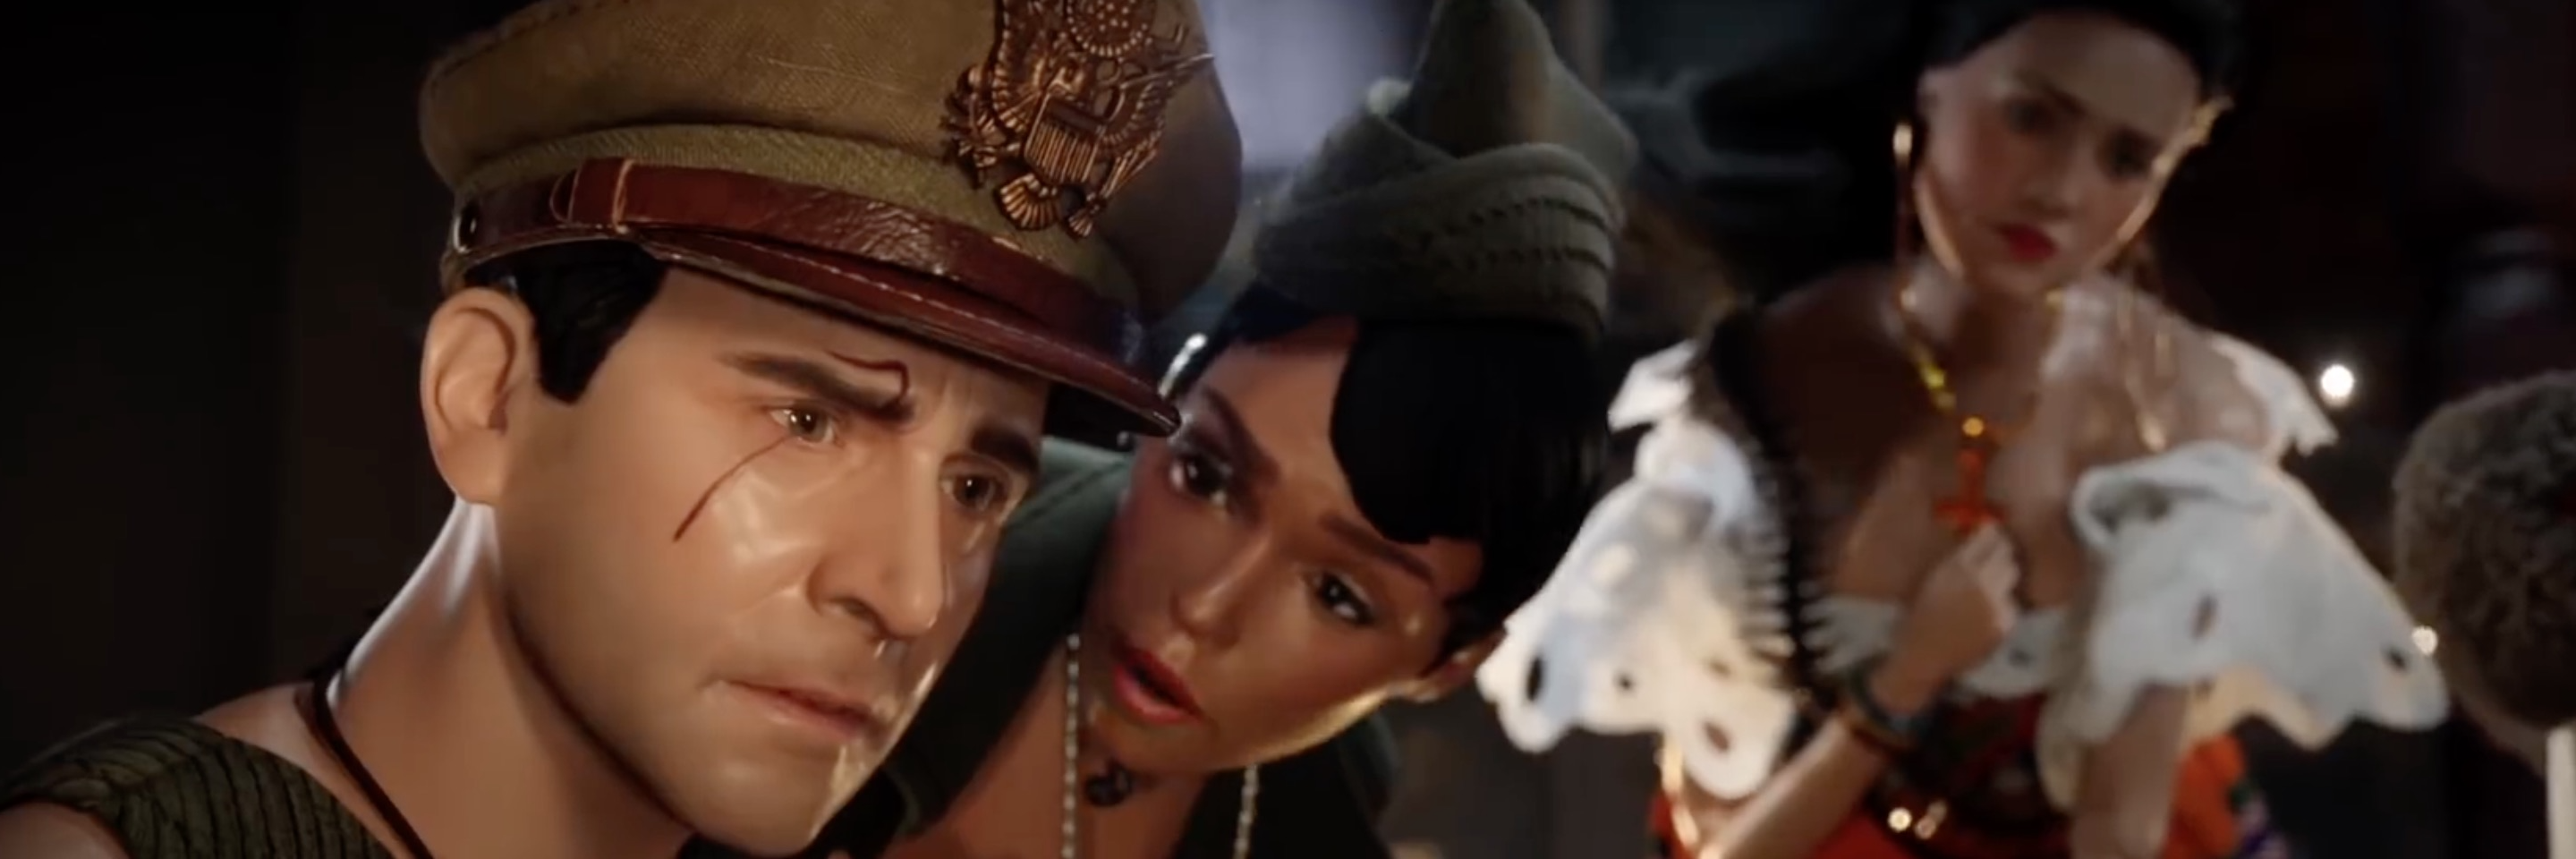 Faceware Powers VFX in Welcome to Marwen